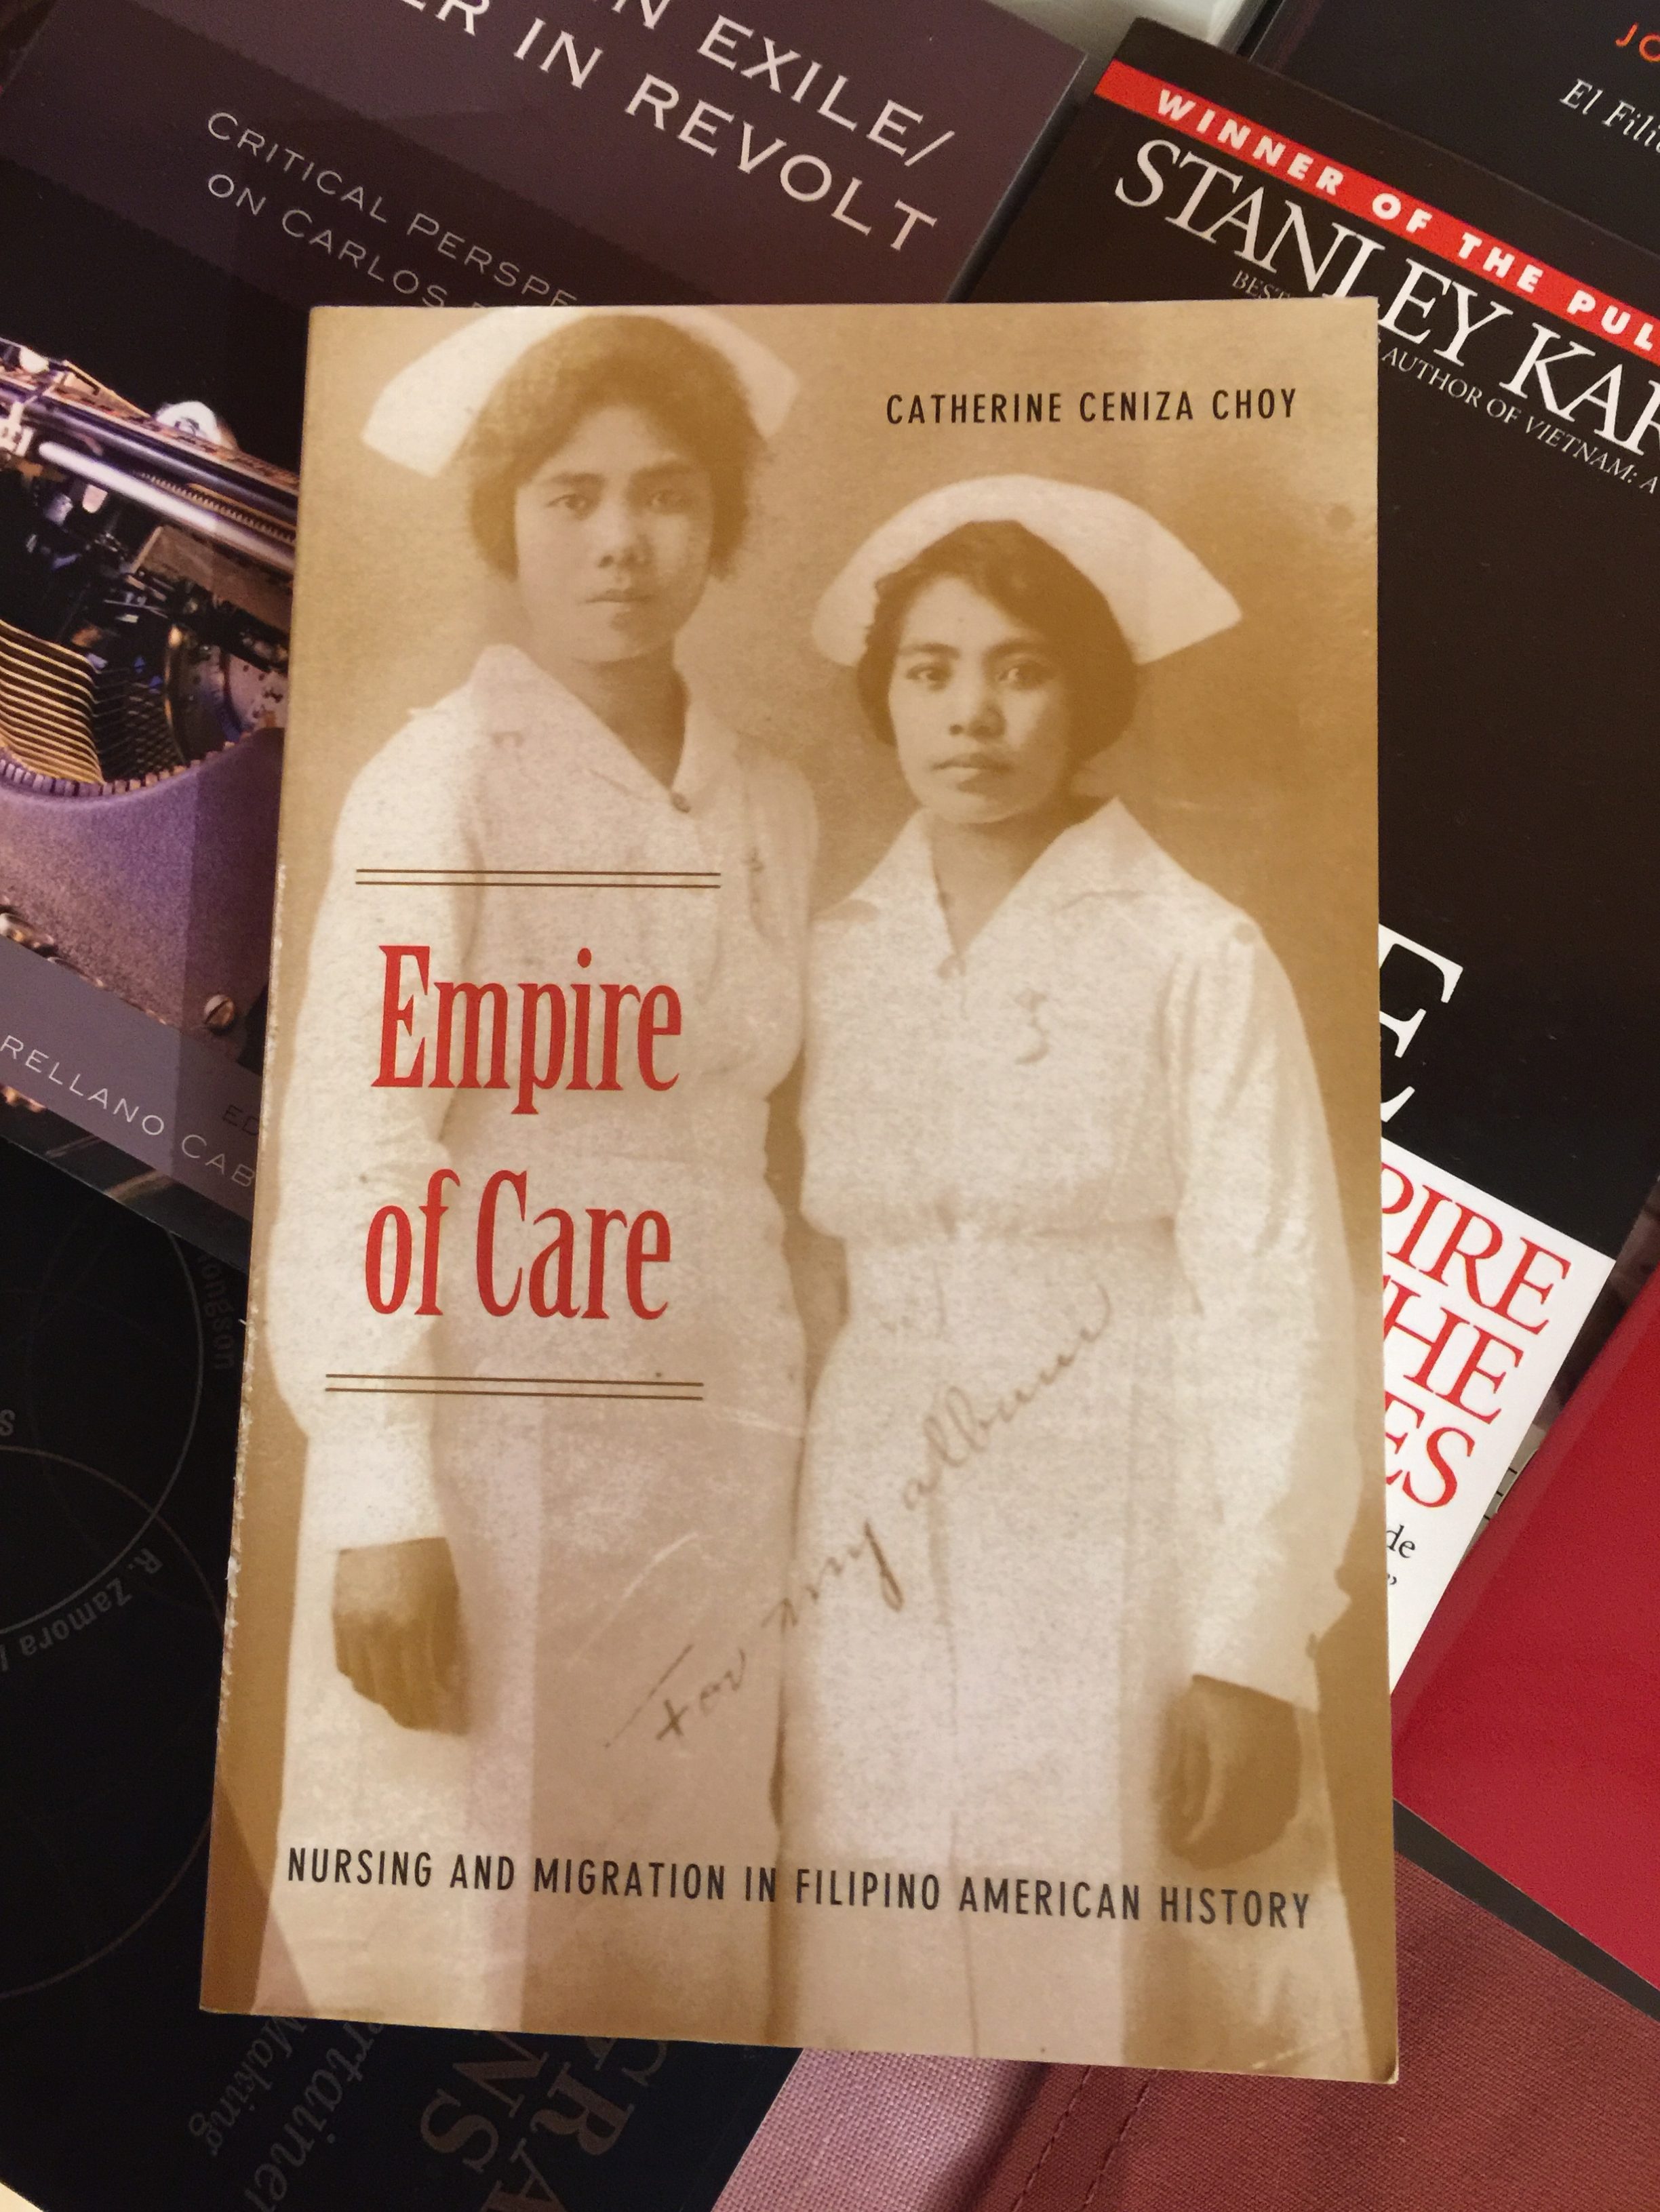 Cover of book titled Empire of Care.